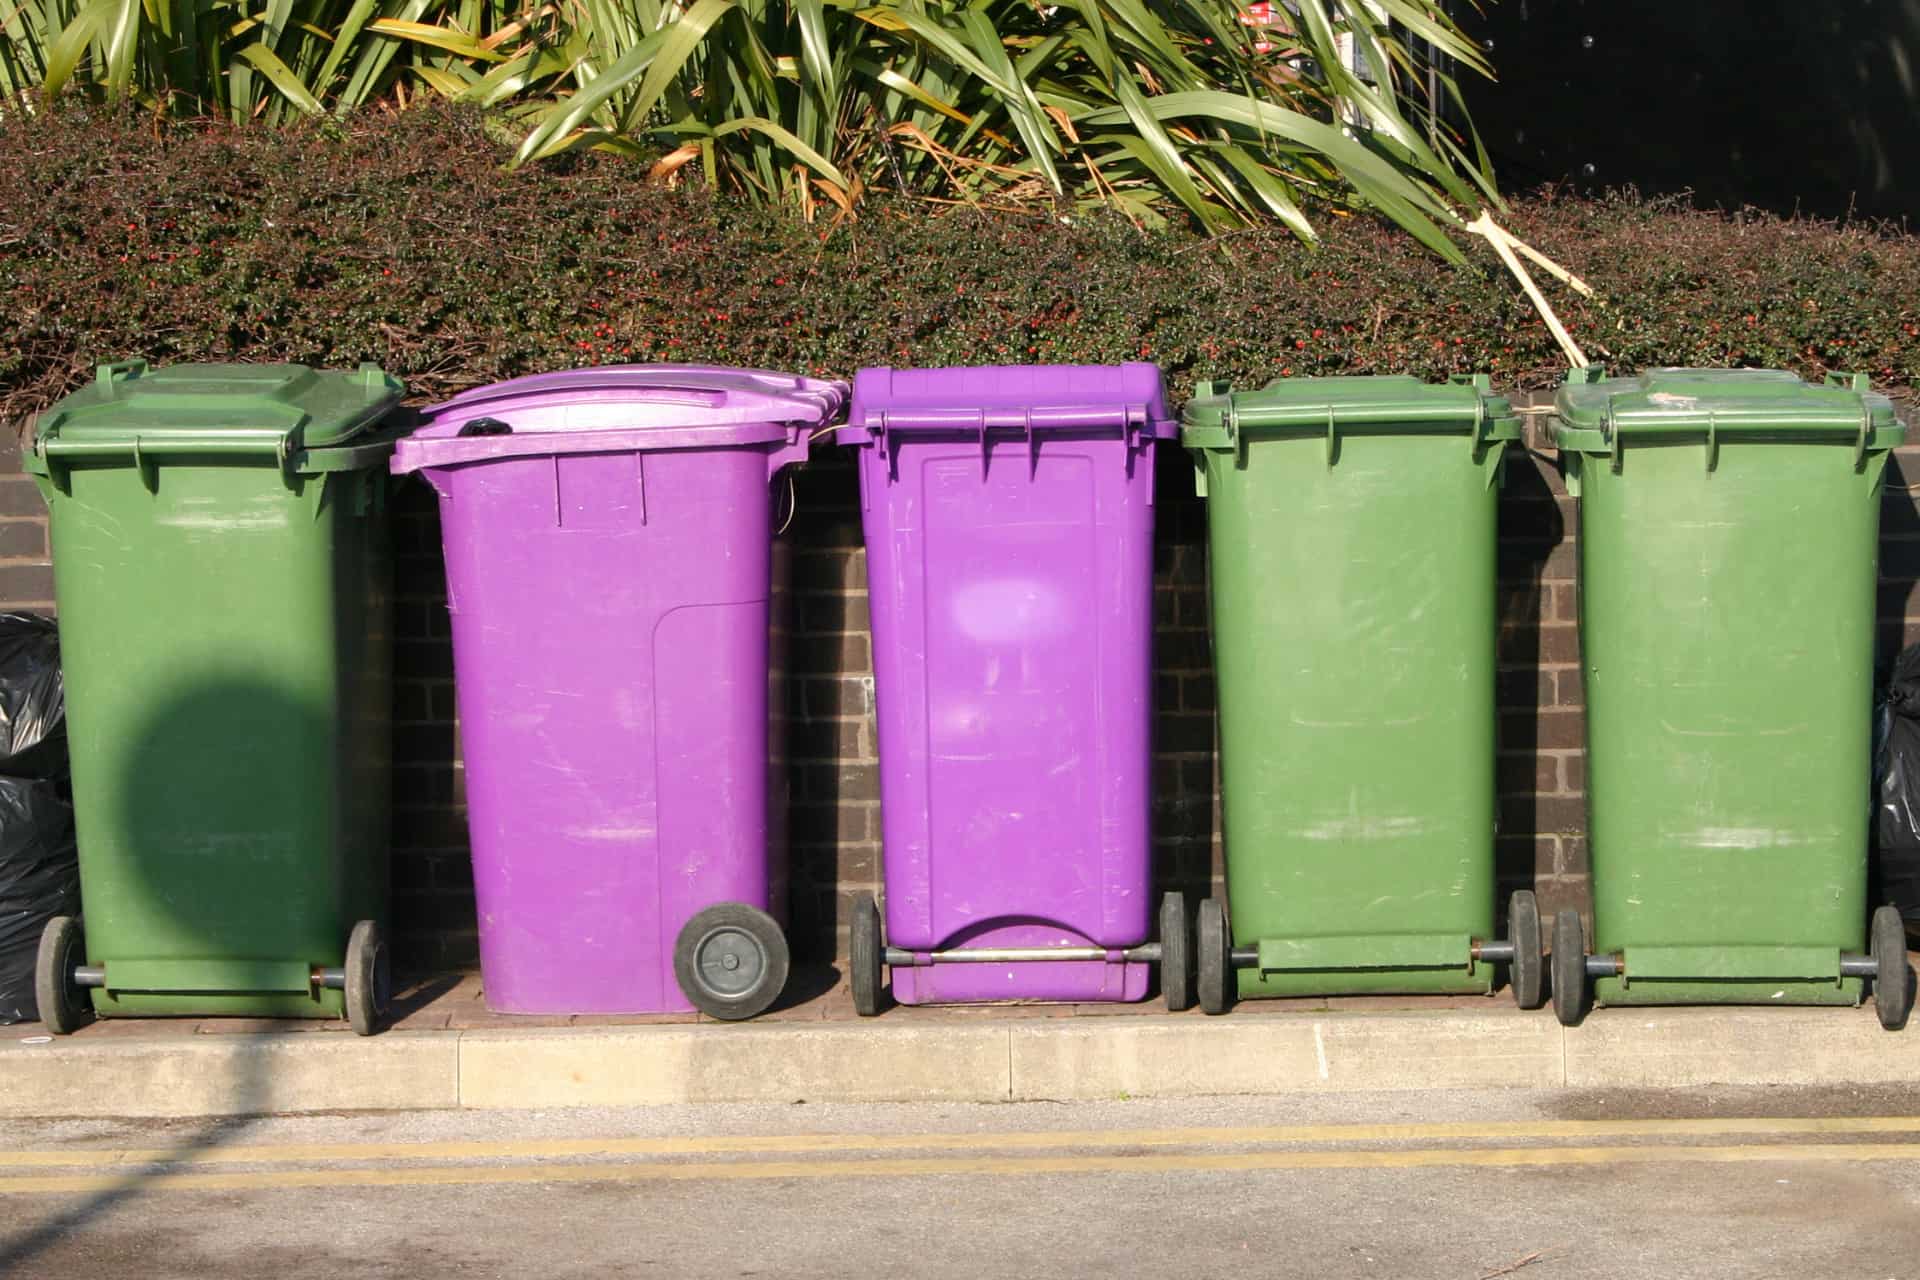 purple and green bins on the curb of a street waiting to be picked up.